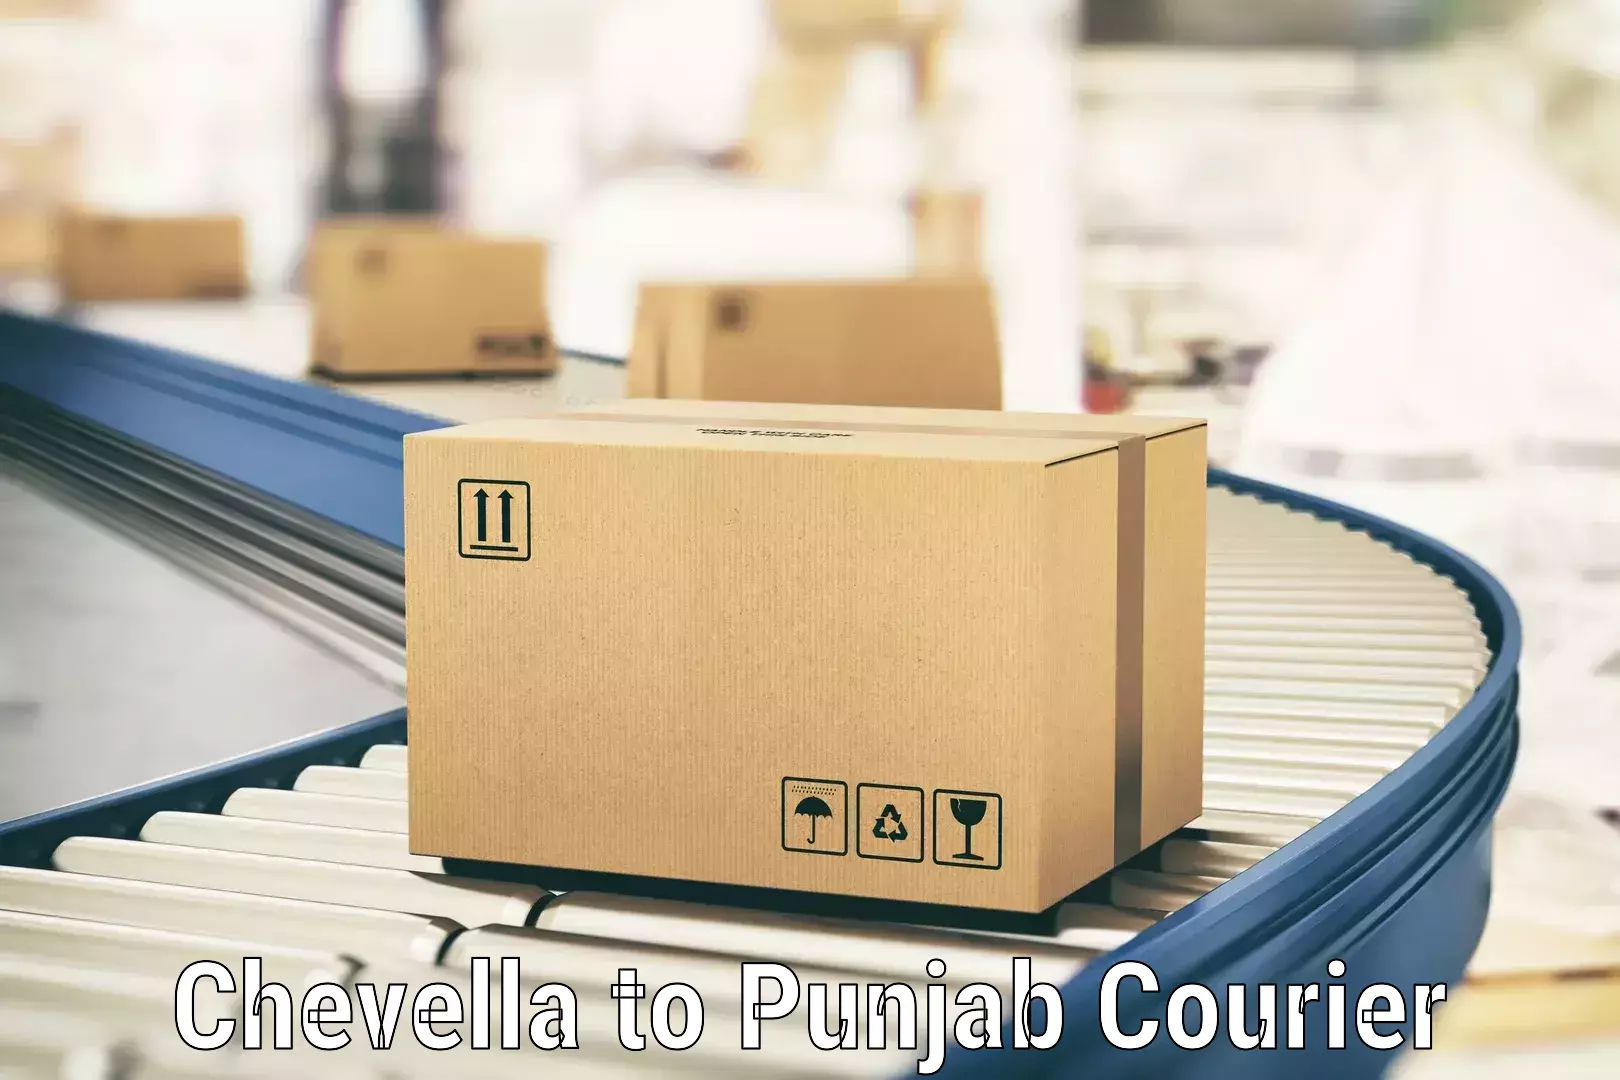 Reliable delivery network in Chevella to Phagwara